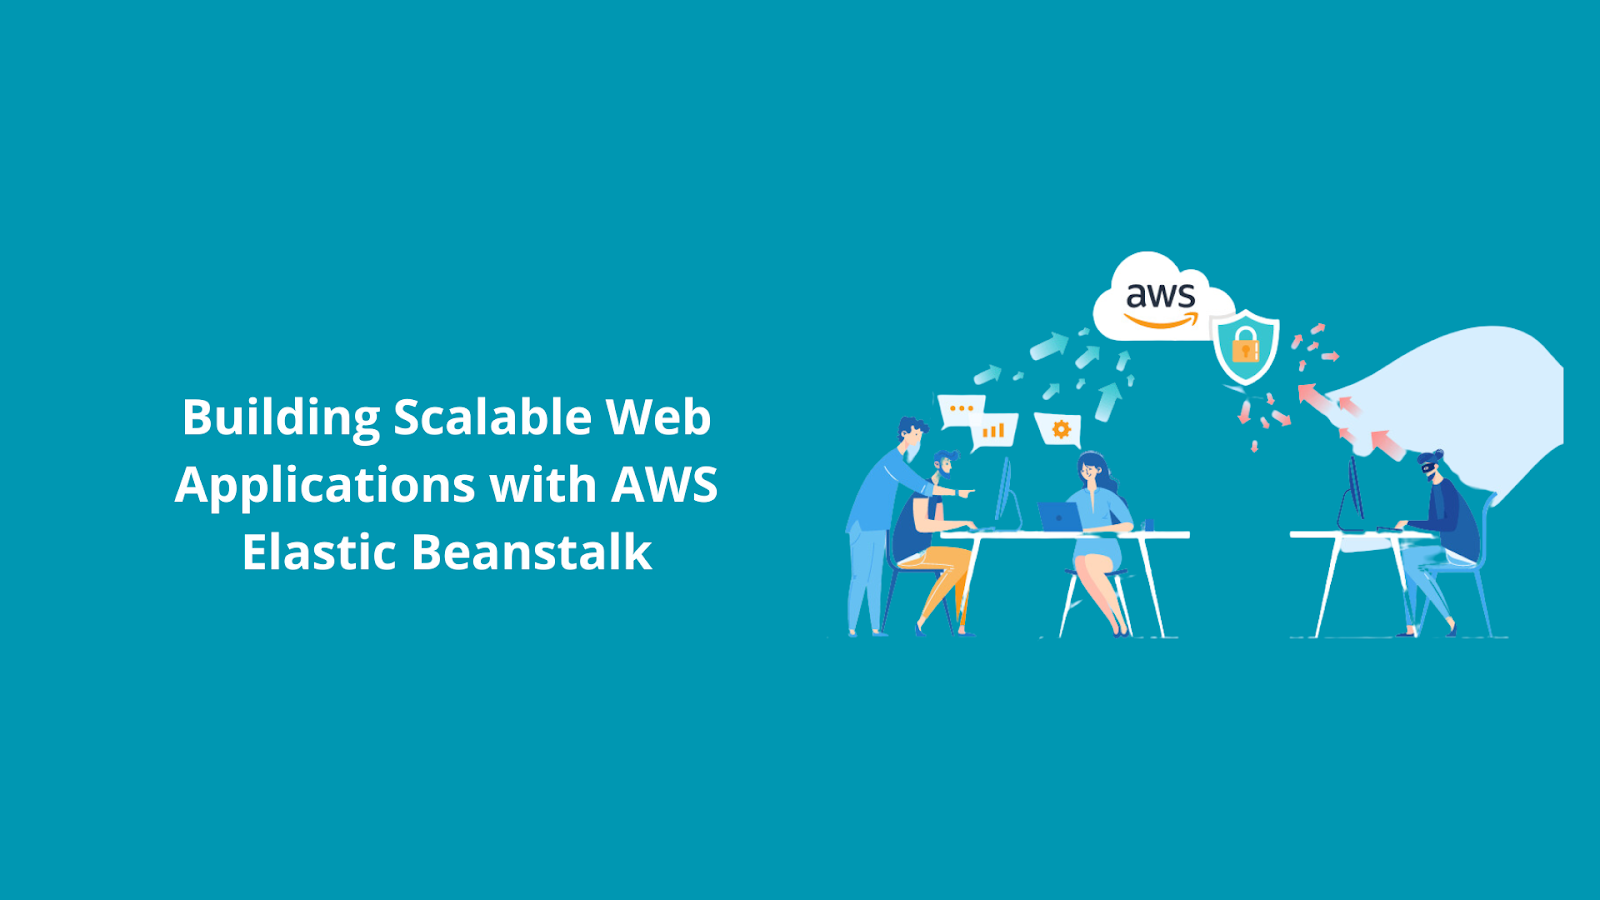 Building Scalable Web Applications with AWS Elastic Beanstalk